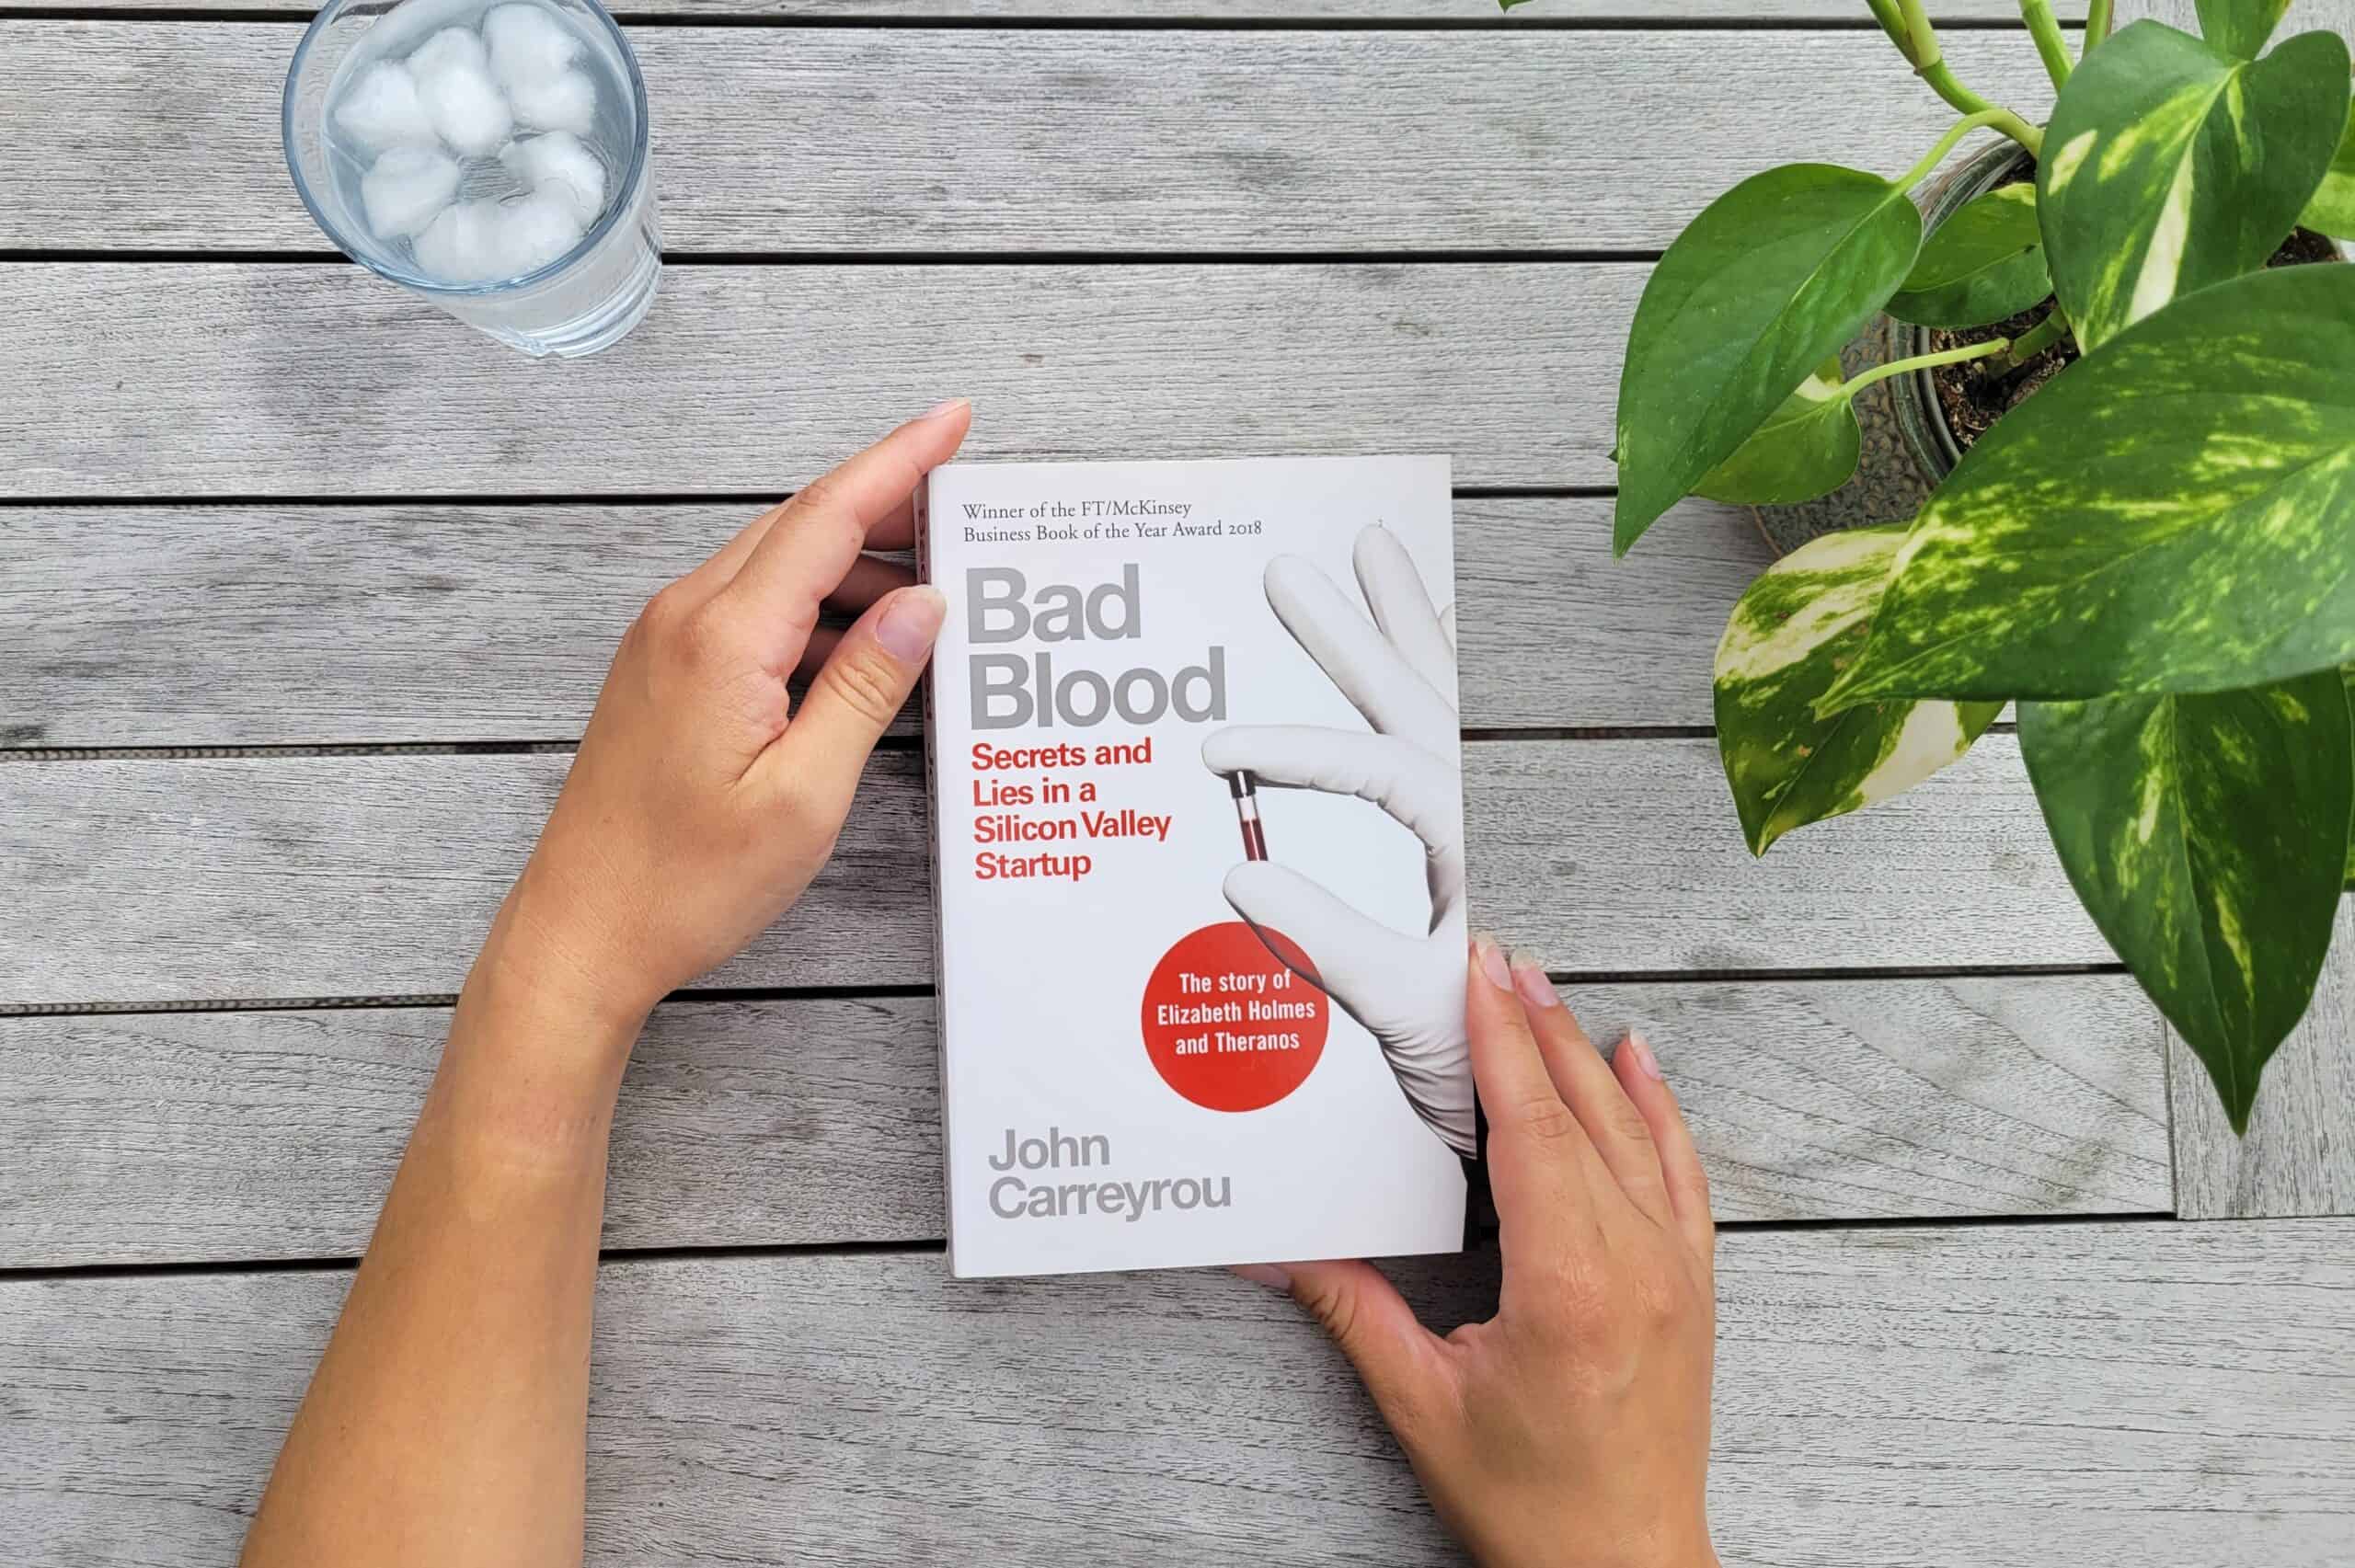 Summary: Bad Blood: Secrets and Lies in a Silicon Valley Startup by John Carreyrou